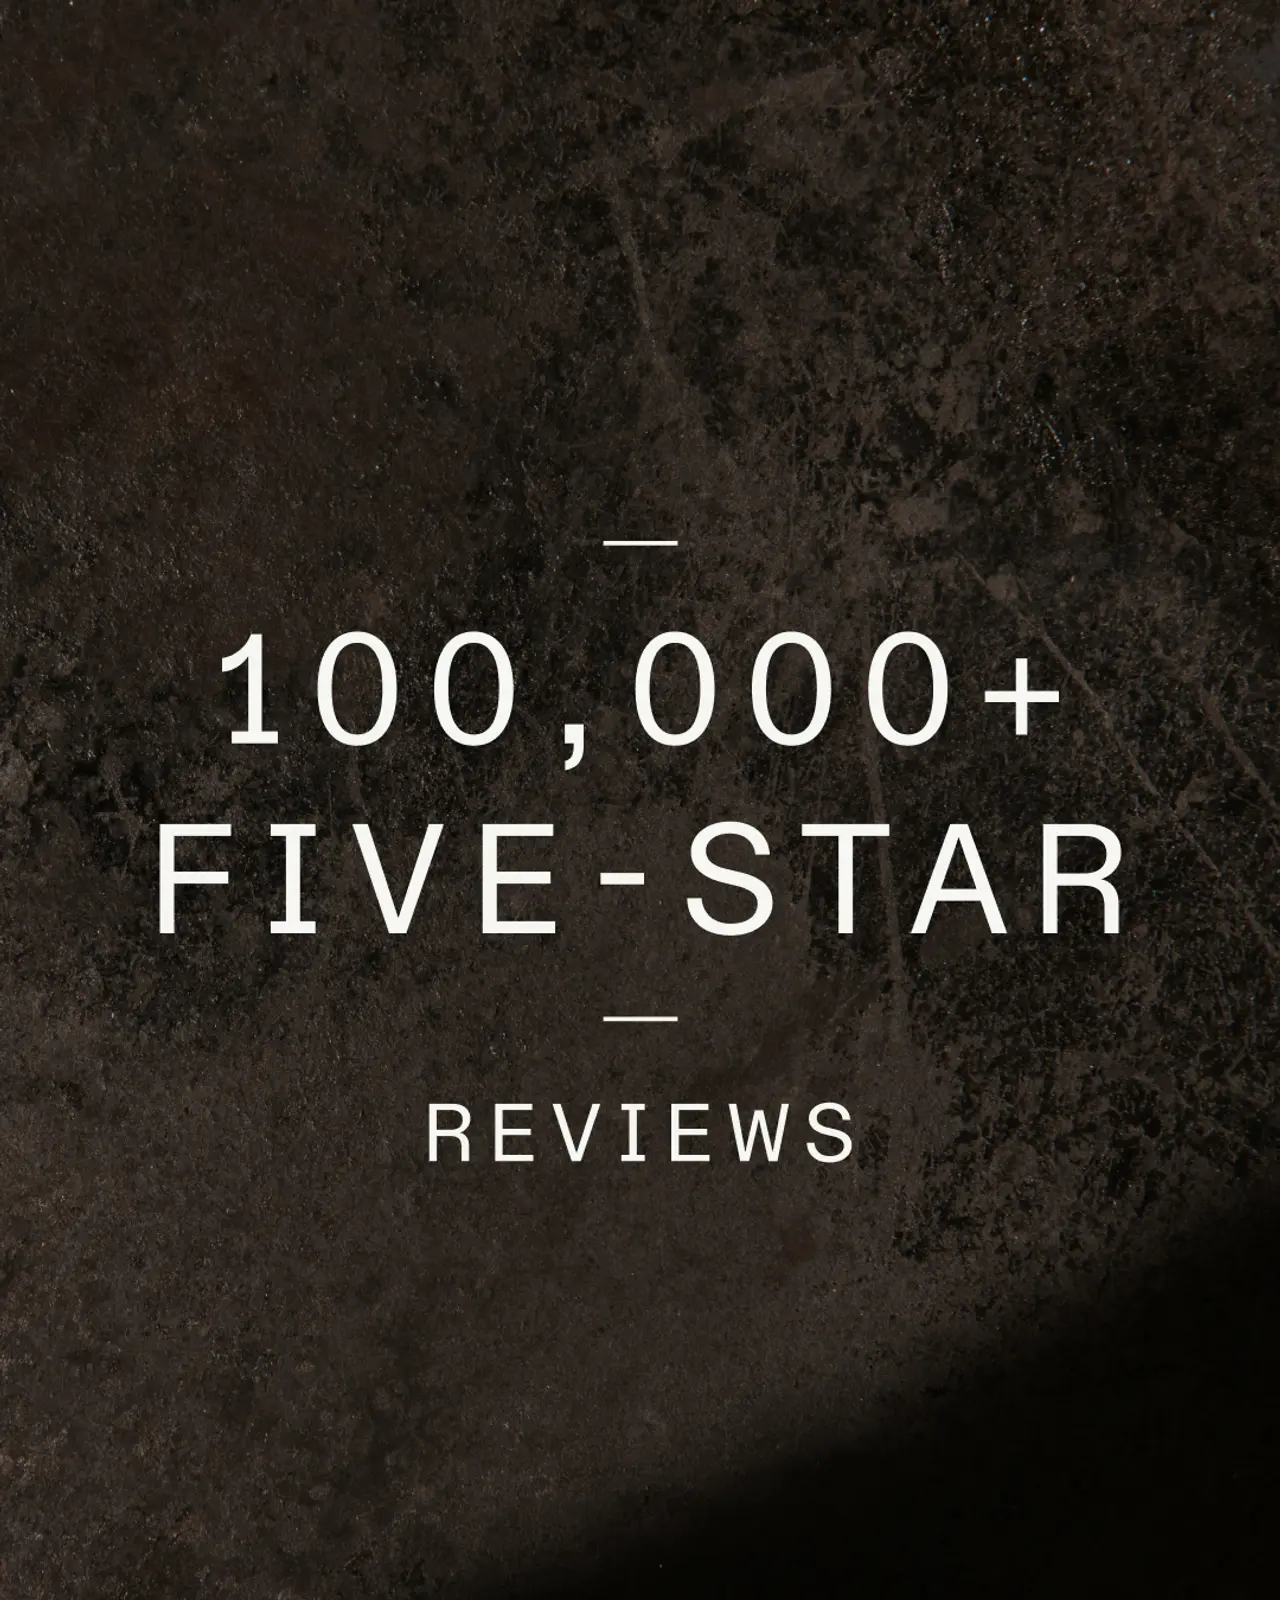 A dark textured background with white text stating "100,000+ FIVE-STAR REVIEWS."